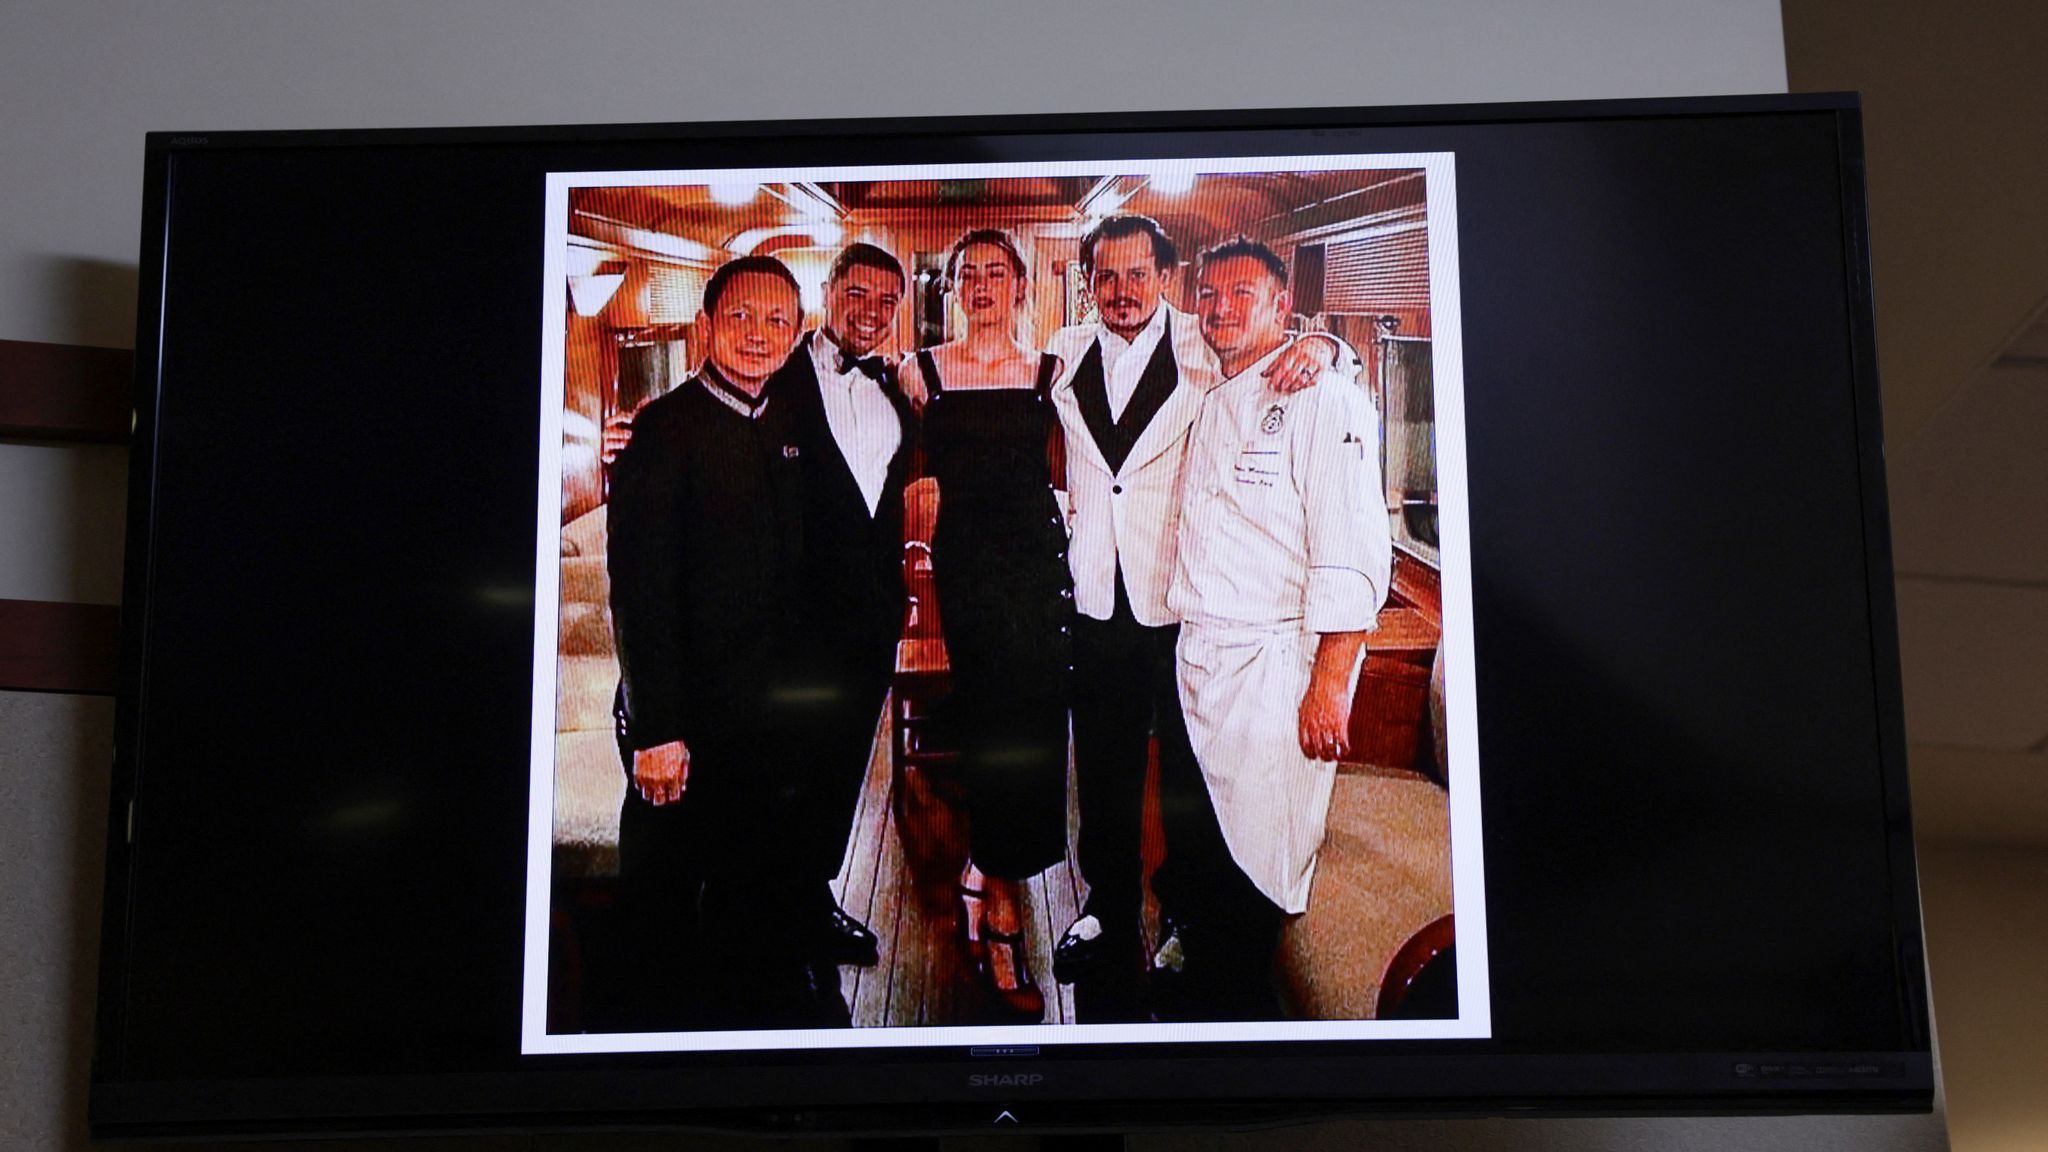  Picture introduced into evidence of Depp and Heard with the staff of the Orient Express train taken at the end of their honeymoon trip in Singapore after their wedding in 2015, is seen on the screen during Depp&#39;s defamation trial a